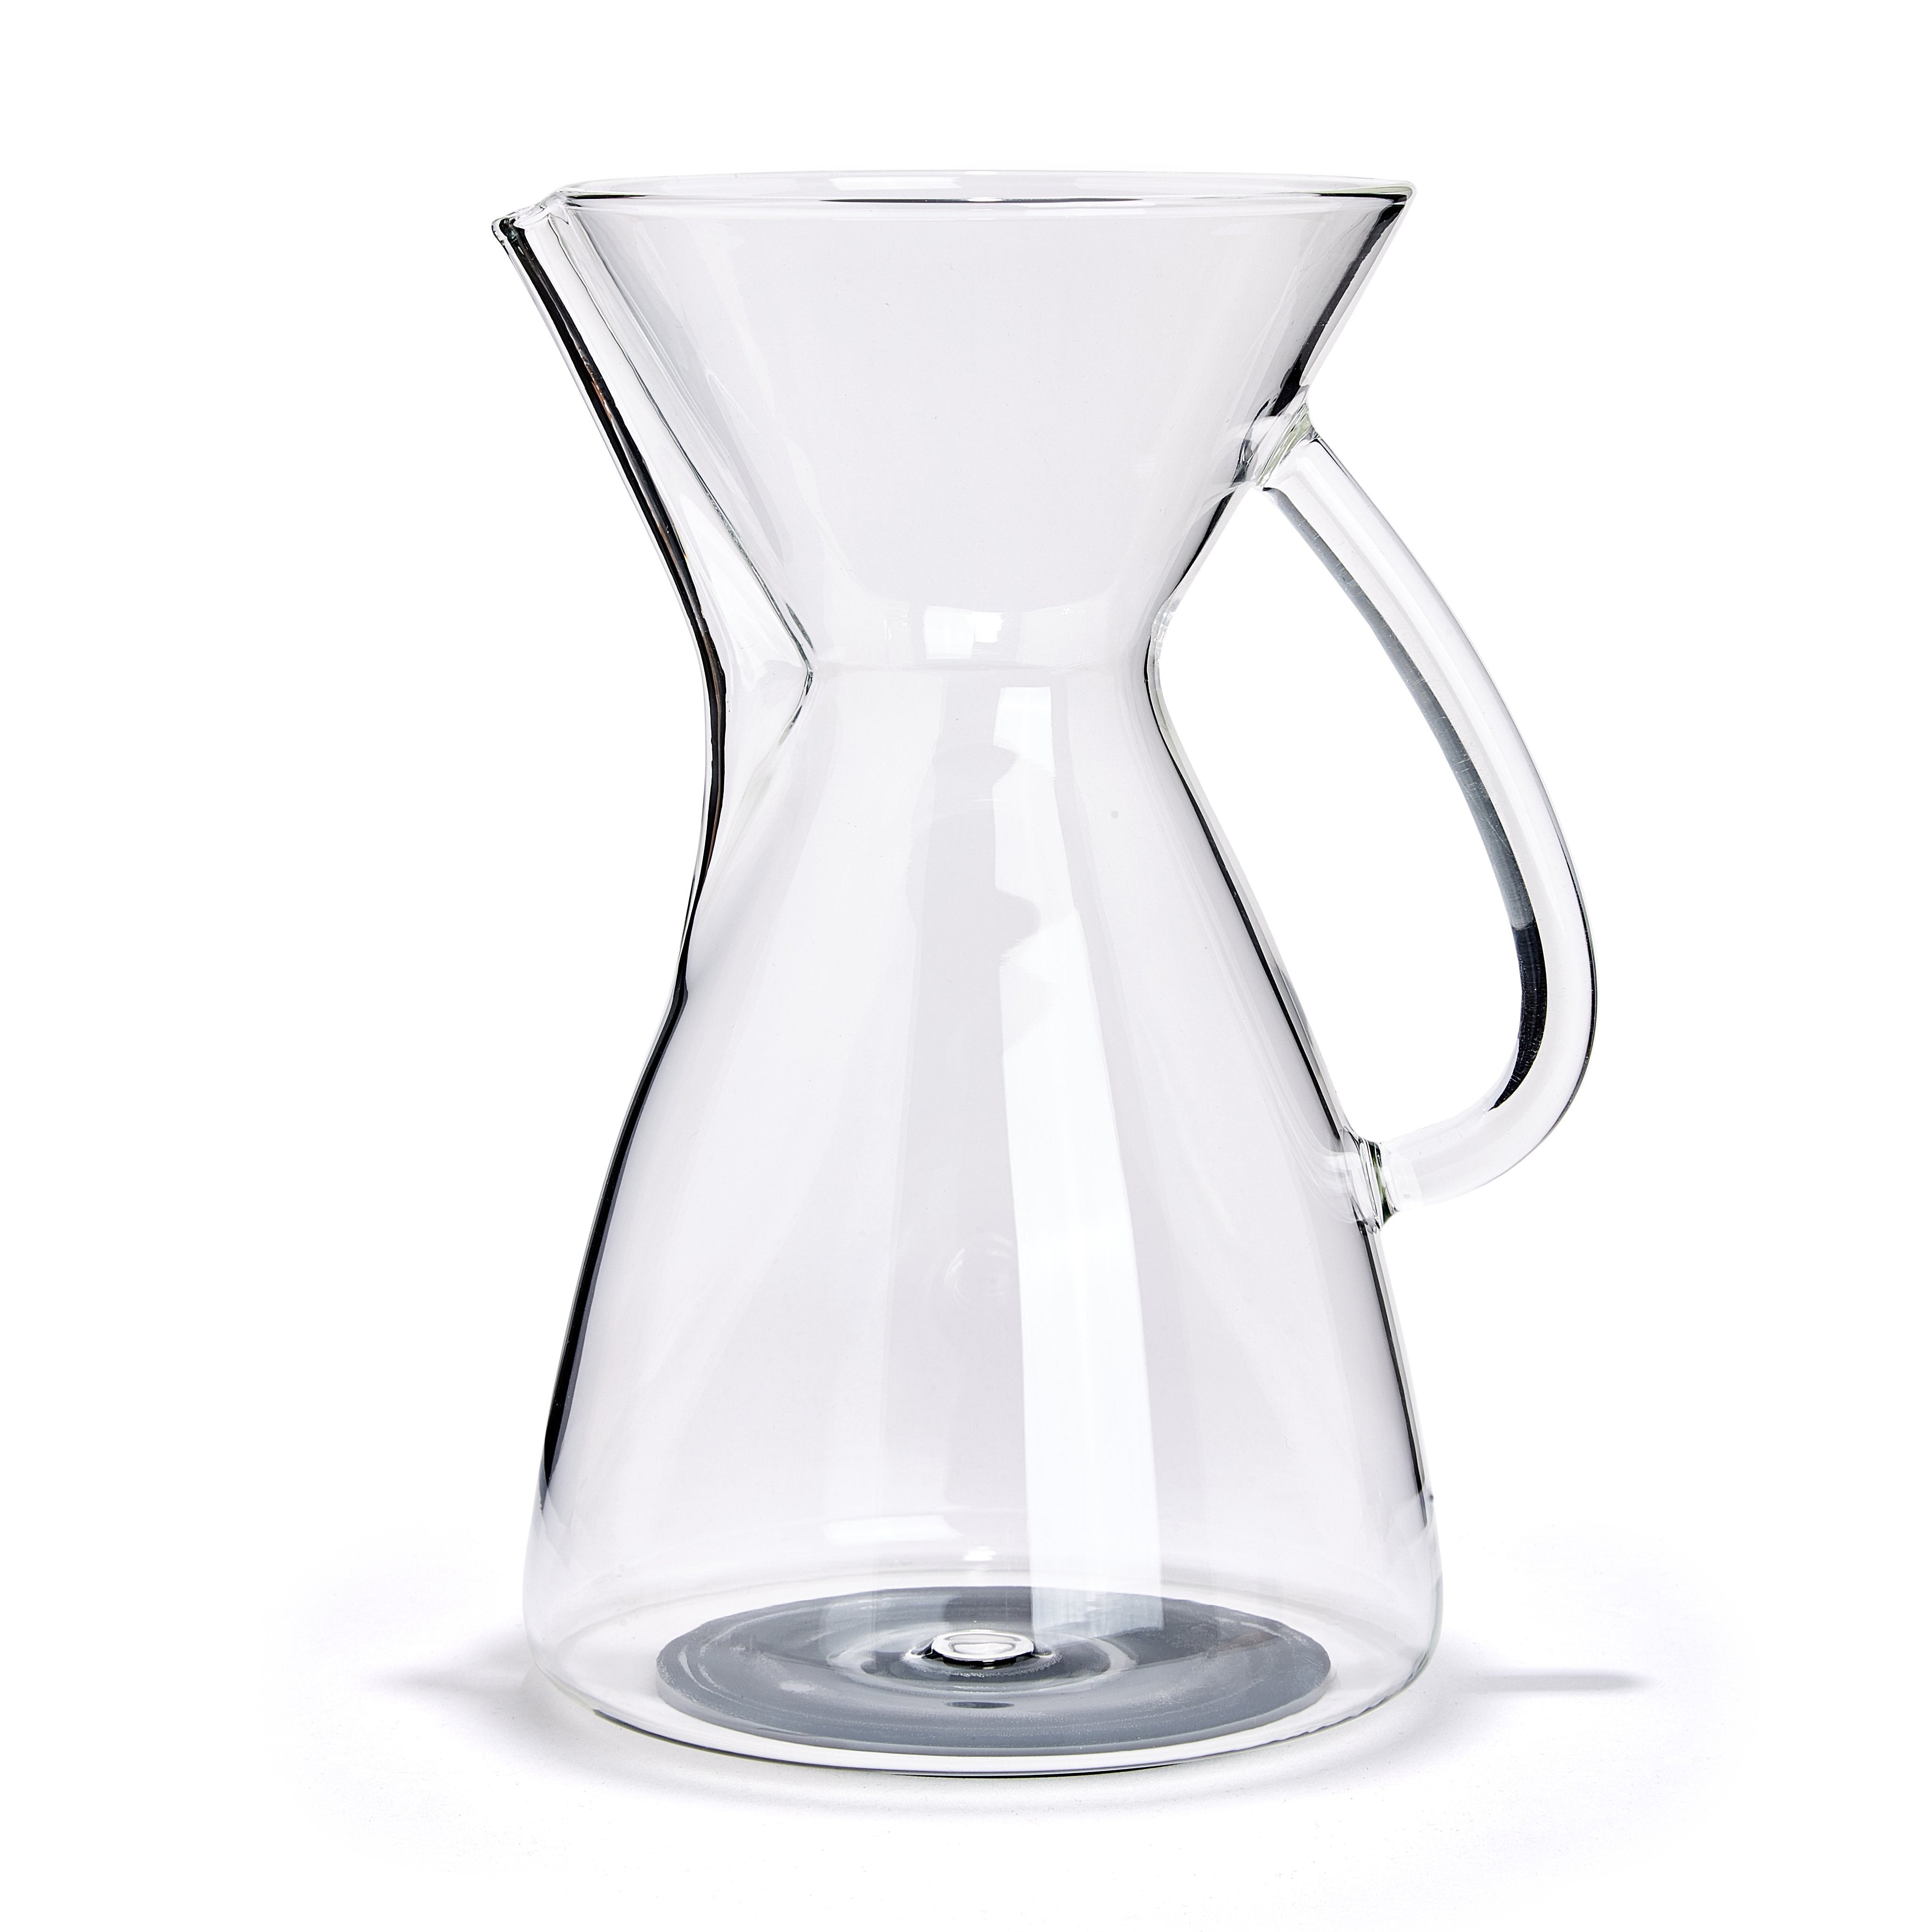 Aerolatte Universal Borosilicate Glass Replacement Carafe For French Press  Coffee Makers, 5-Cup, 20-Ounce Capacity (20 oz, 600 ml)